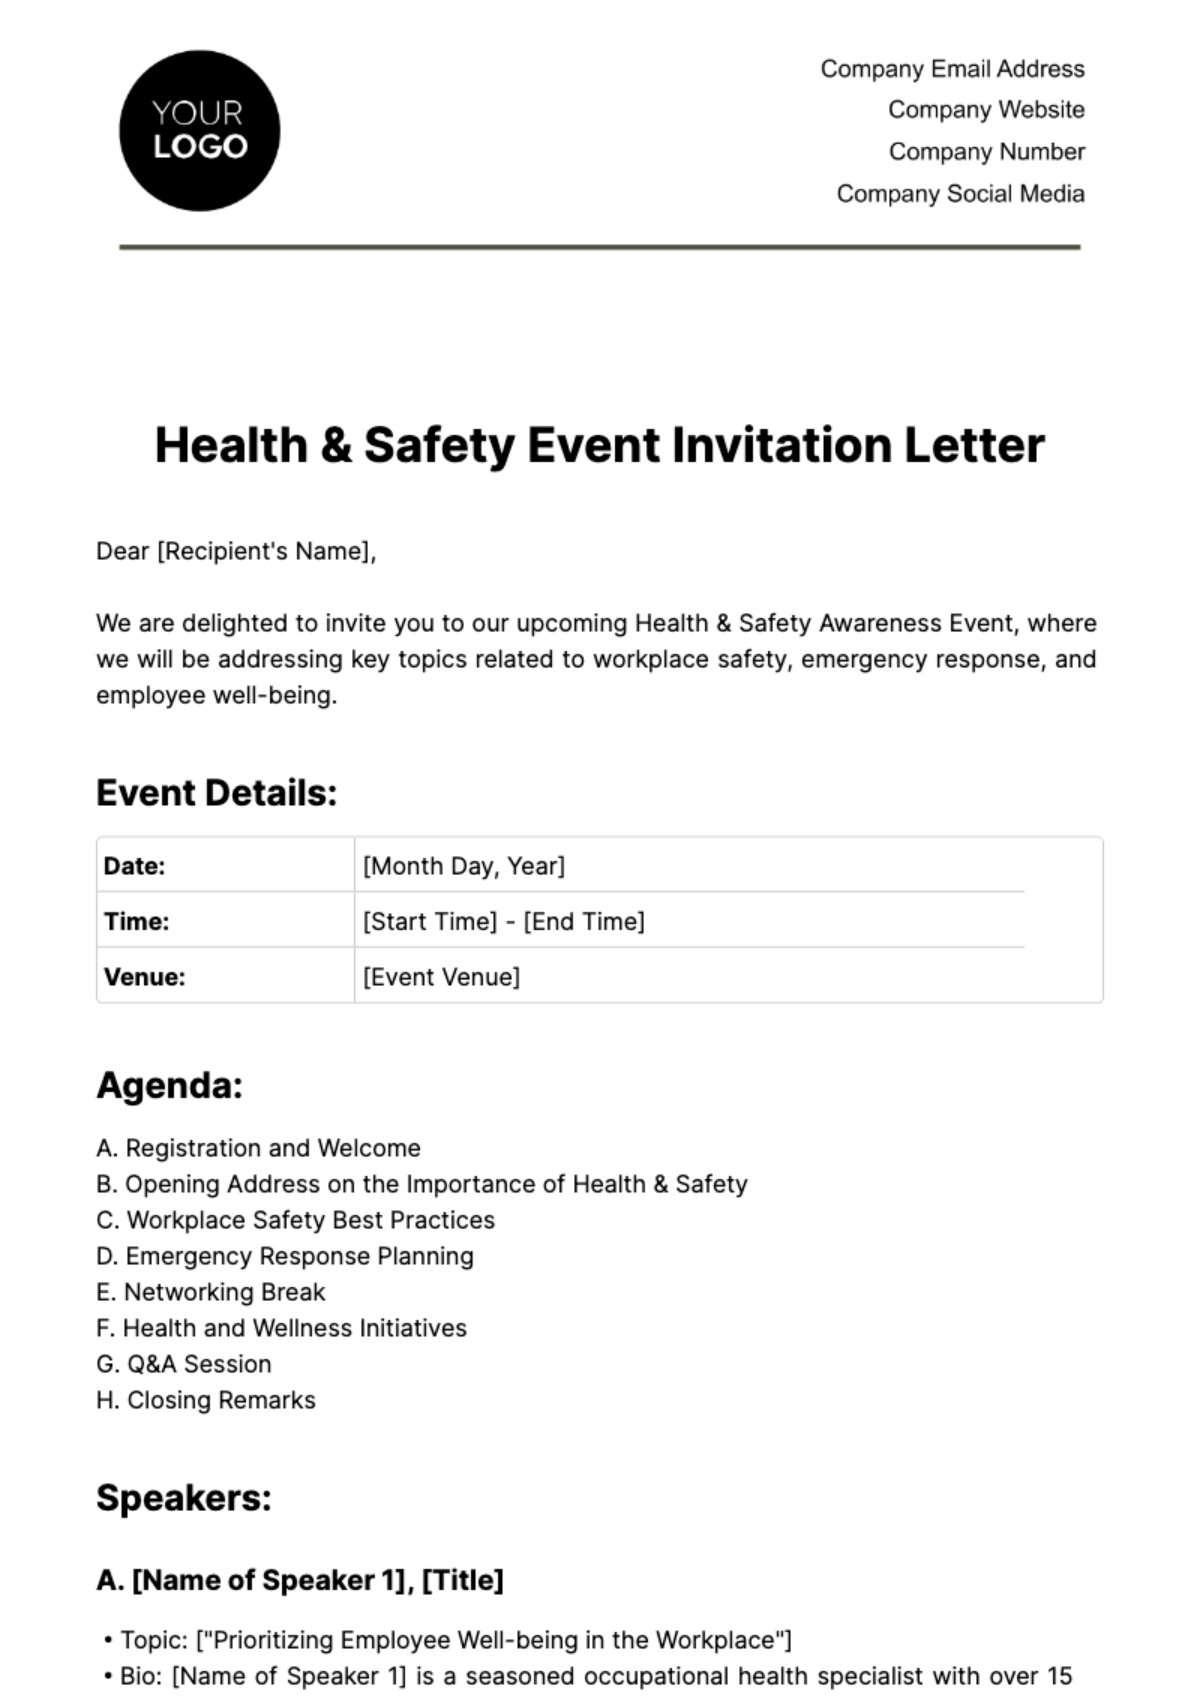 Free Health & Safety Event Invitation Letter Template